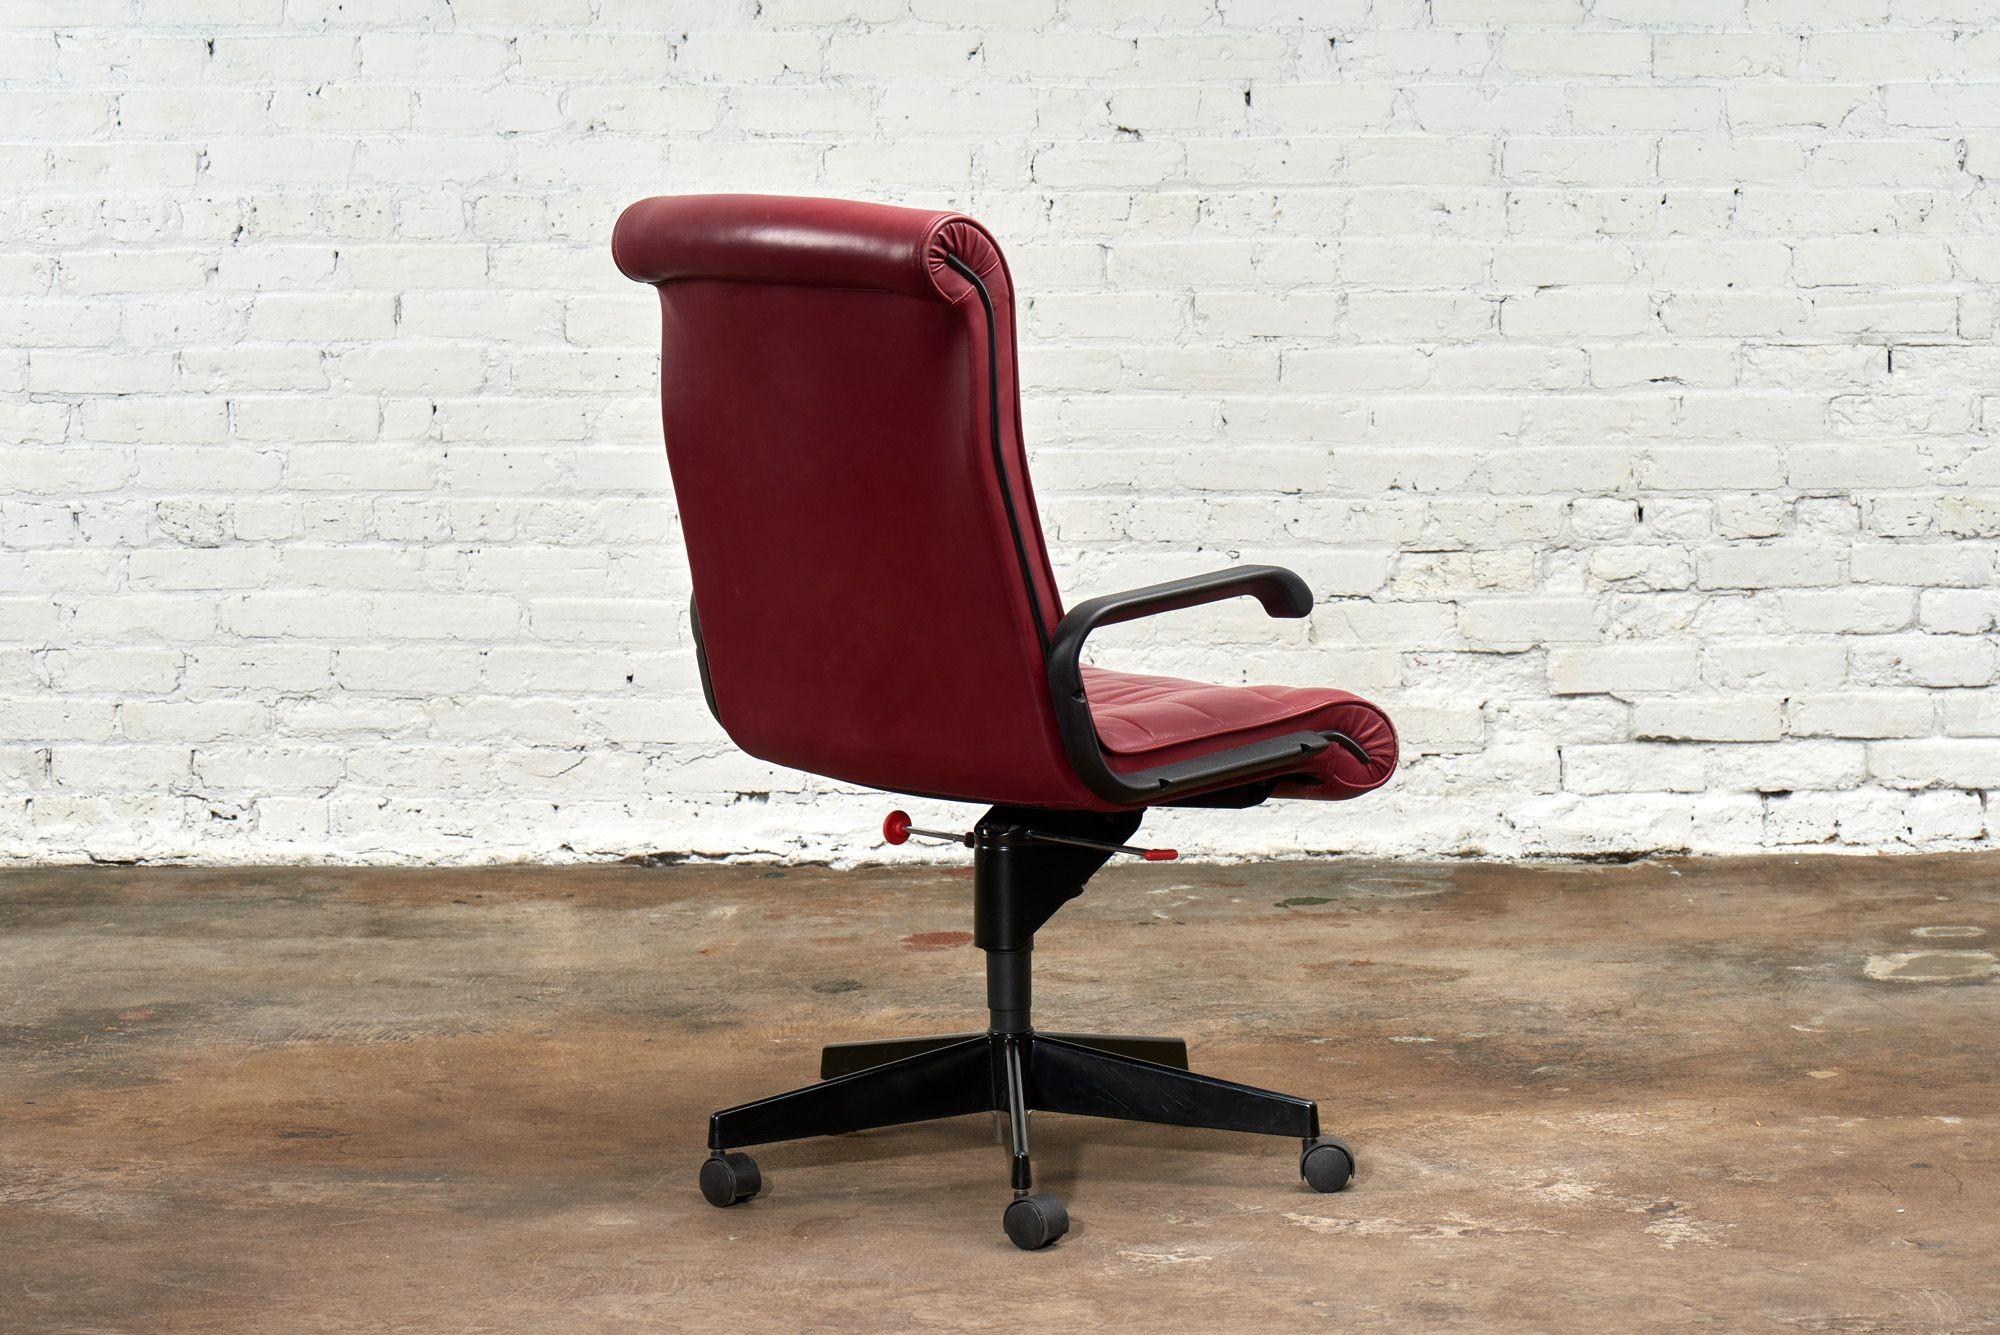 French Red Leather Desk Chair by Richard Sapper for Knoll Inc/Knoll Intl, France 1992 For Sale